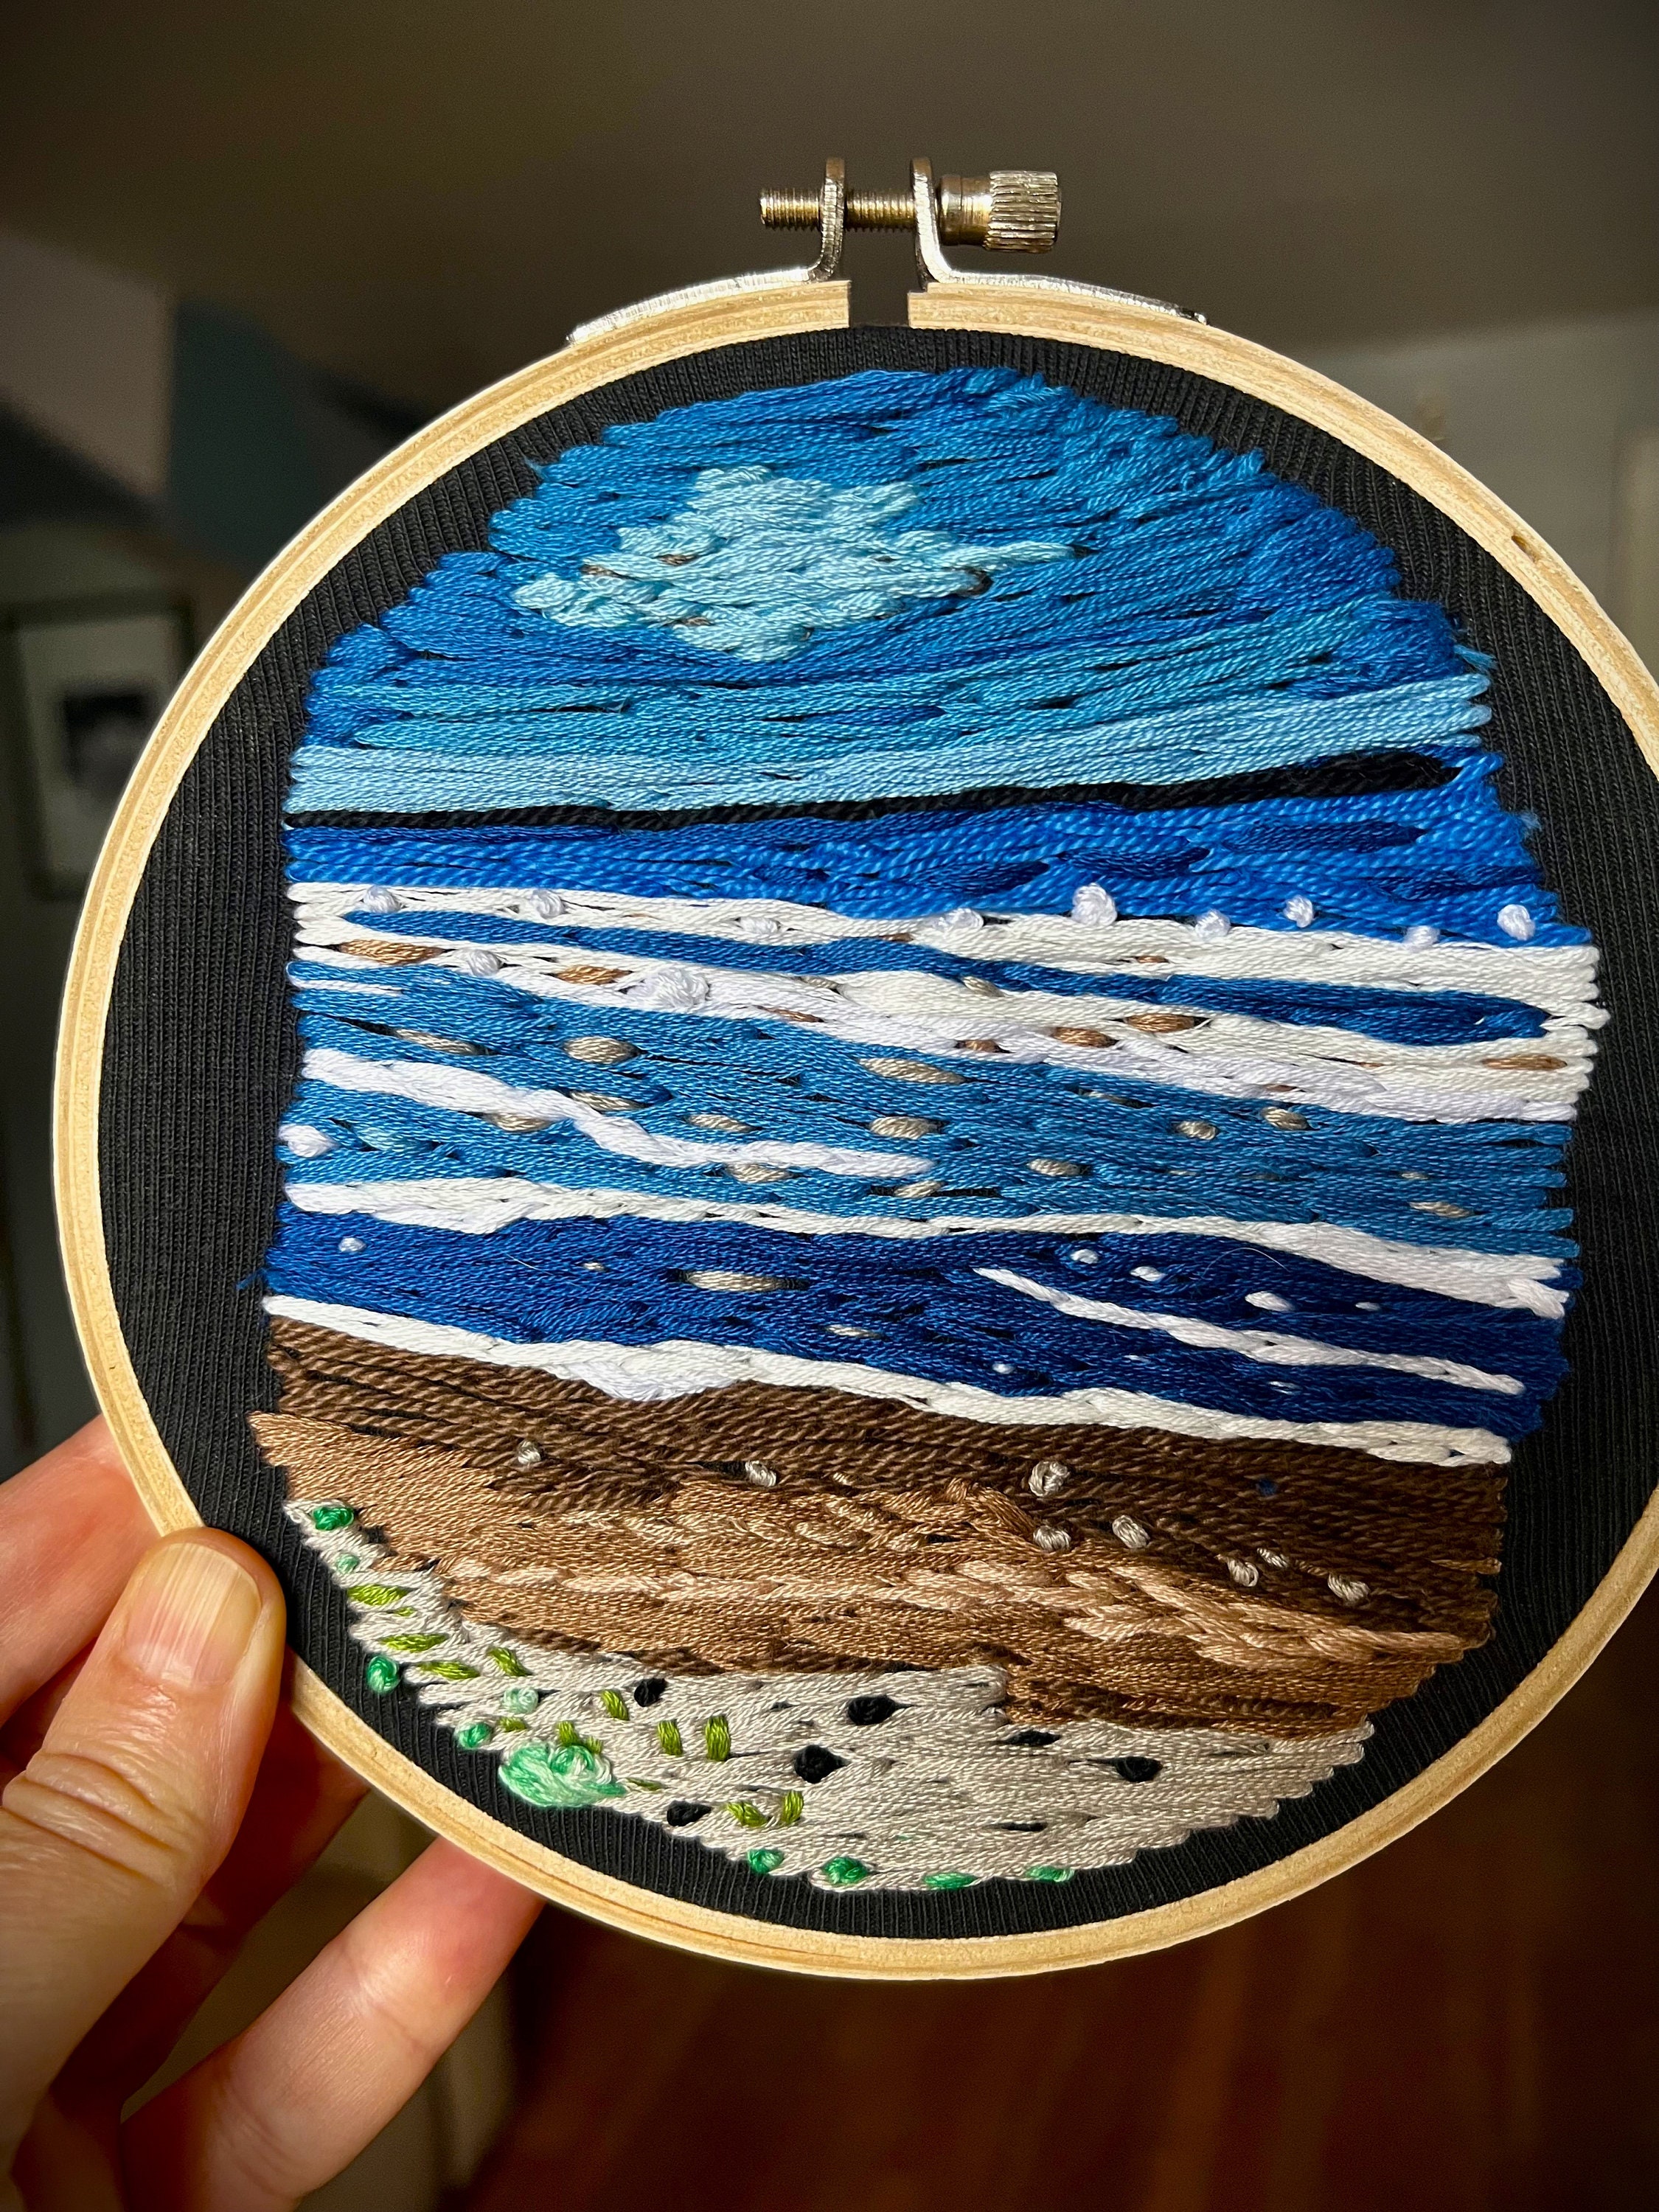 6 Inch Embroidery Hoop Frame With Embroidered Beach Landscape.Handmade